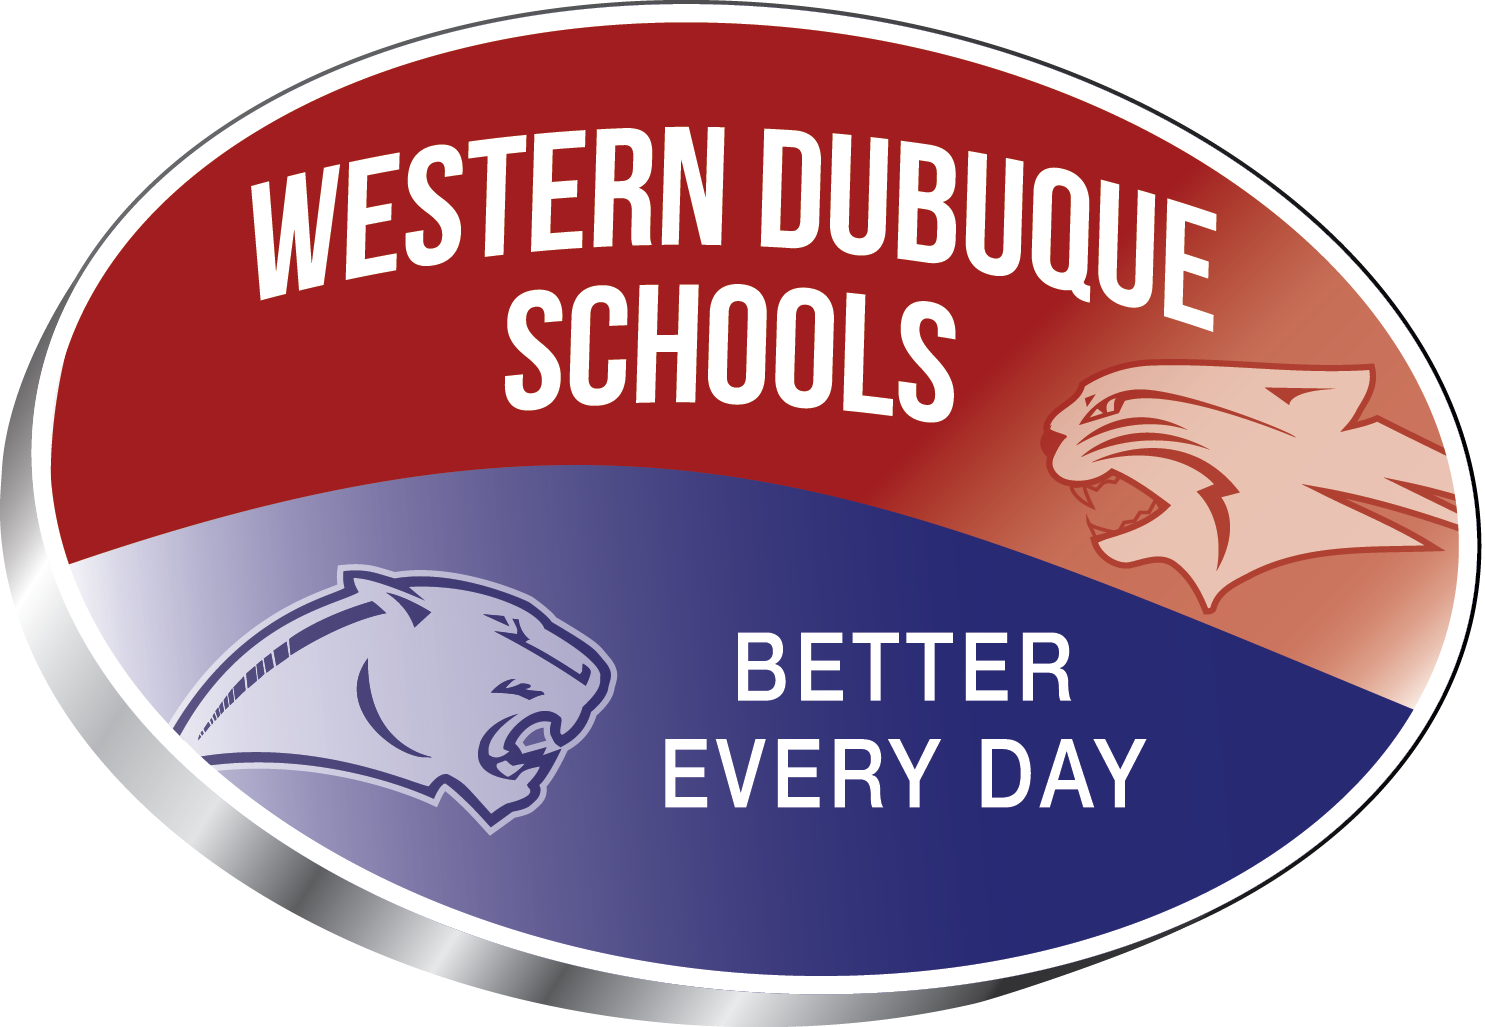 Western Dubuque Schools - Better Every Day